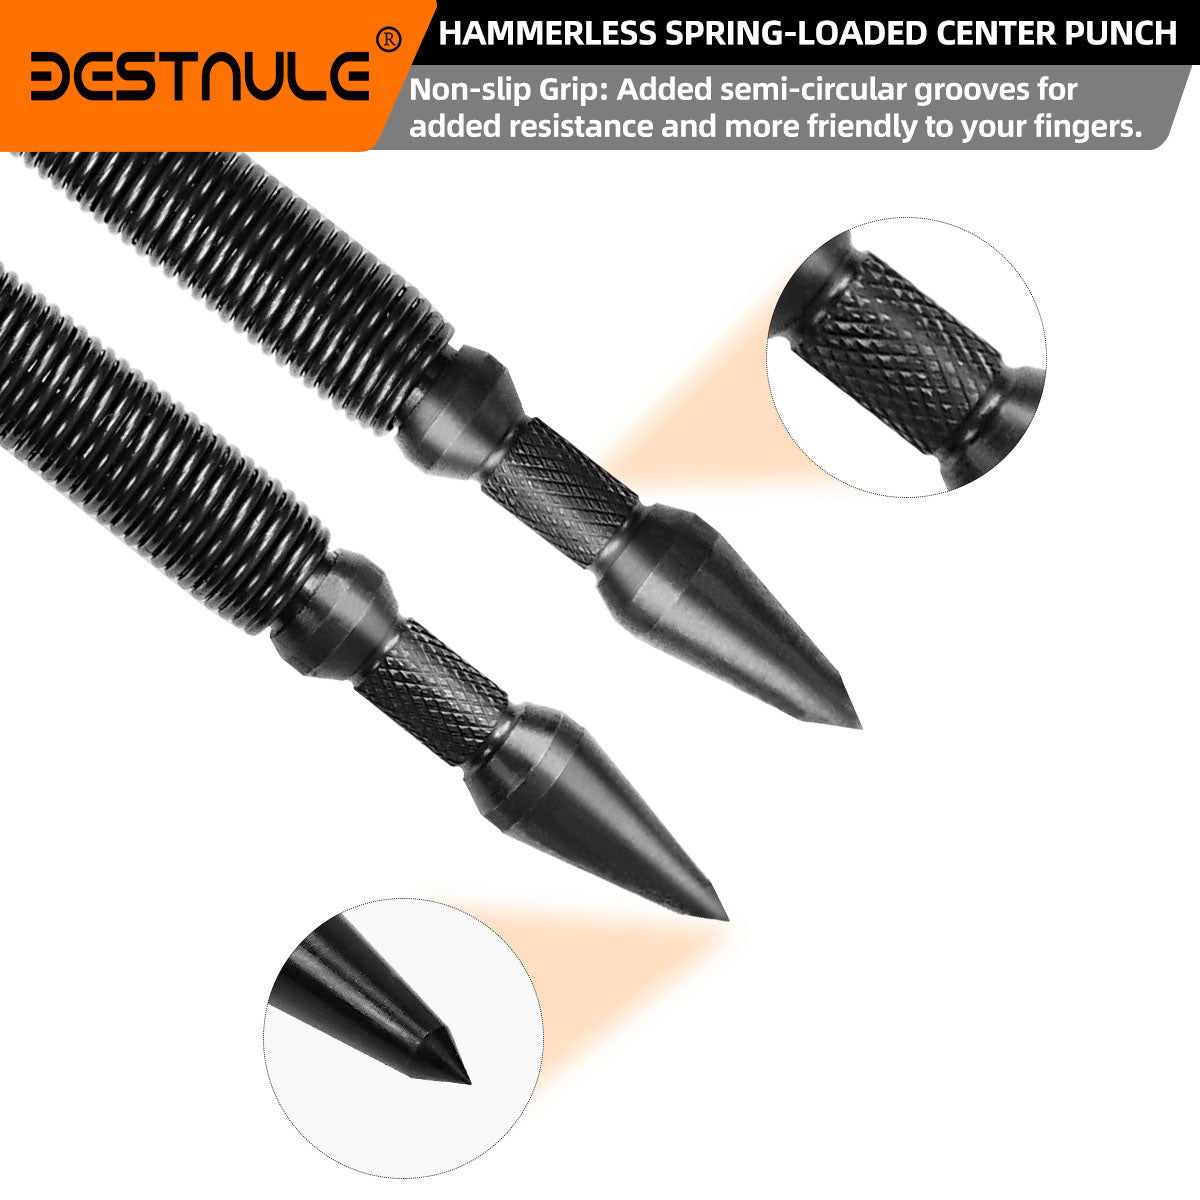 BESTNULE 1-Piece Nail Setter Dual Head Center Punch, Spring Loaded Center Hole Punch, Hand Tool for Metal or Wood, Nail Tool Features 1/8-in, 3/16-in